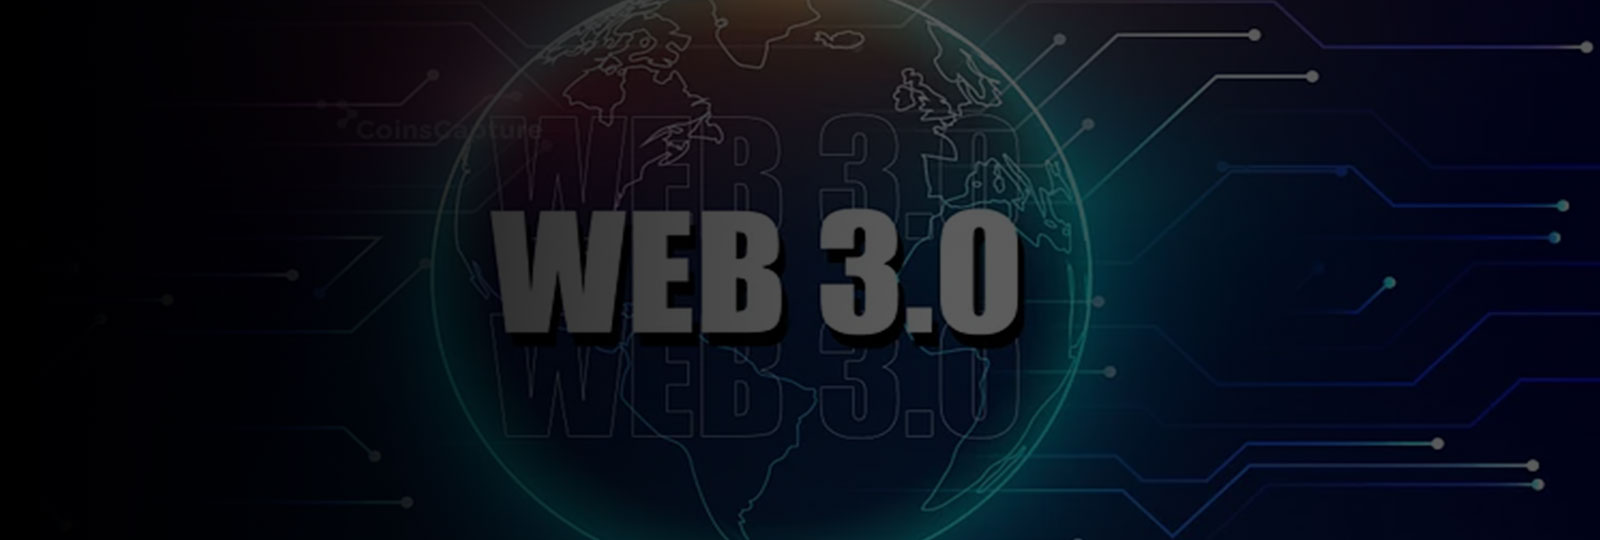 Futuristic Web3.0 solutions aimed to provide greater operational transparency.